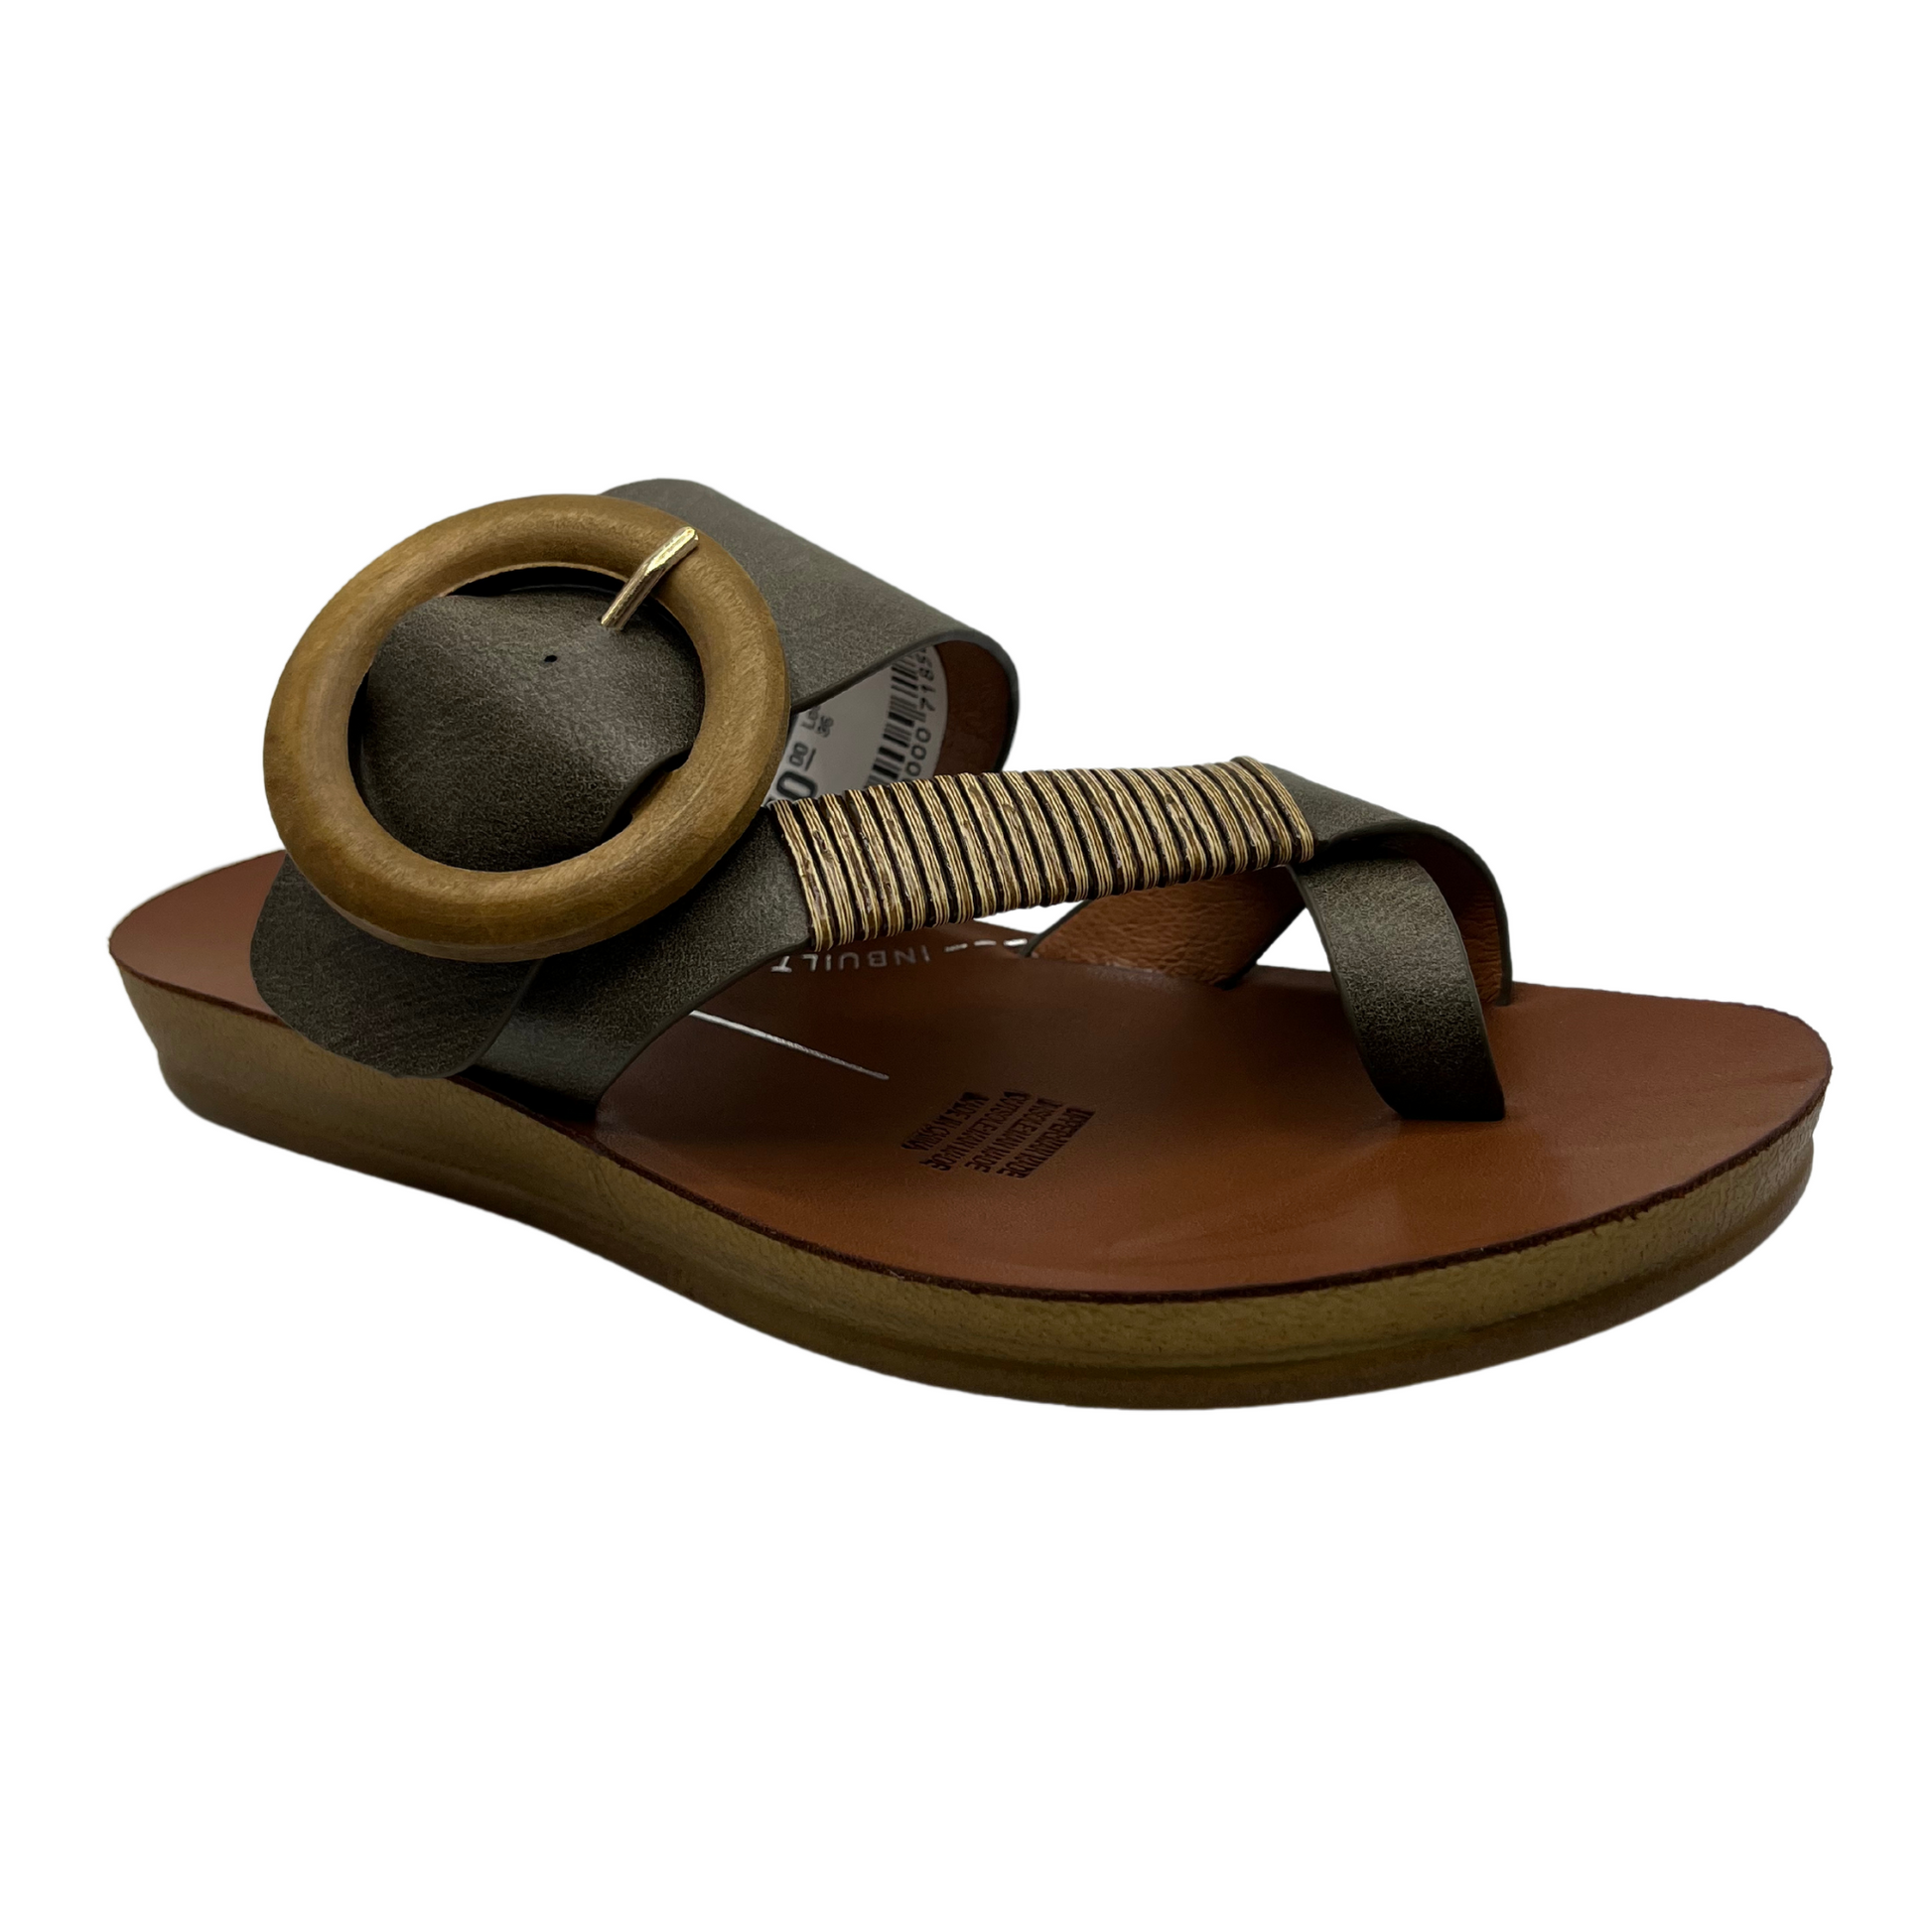 45 degree angled view of khaki strapped slip on sandal. Featuring a wooden buckle and bamboo wrap on the toe strap.